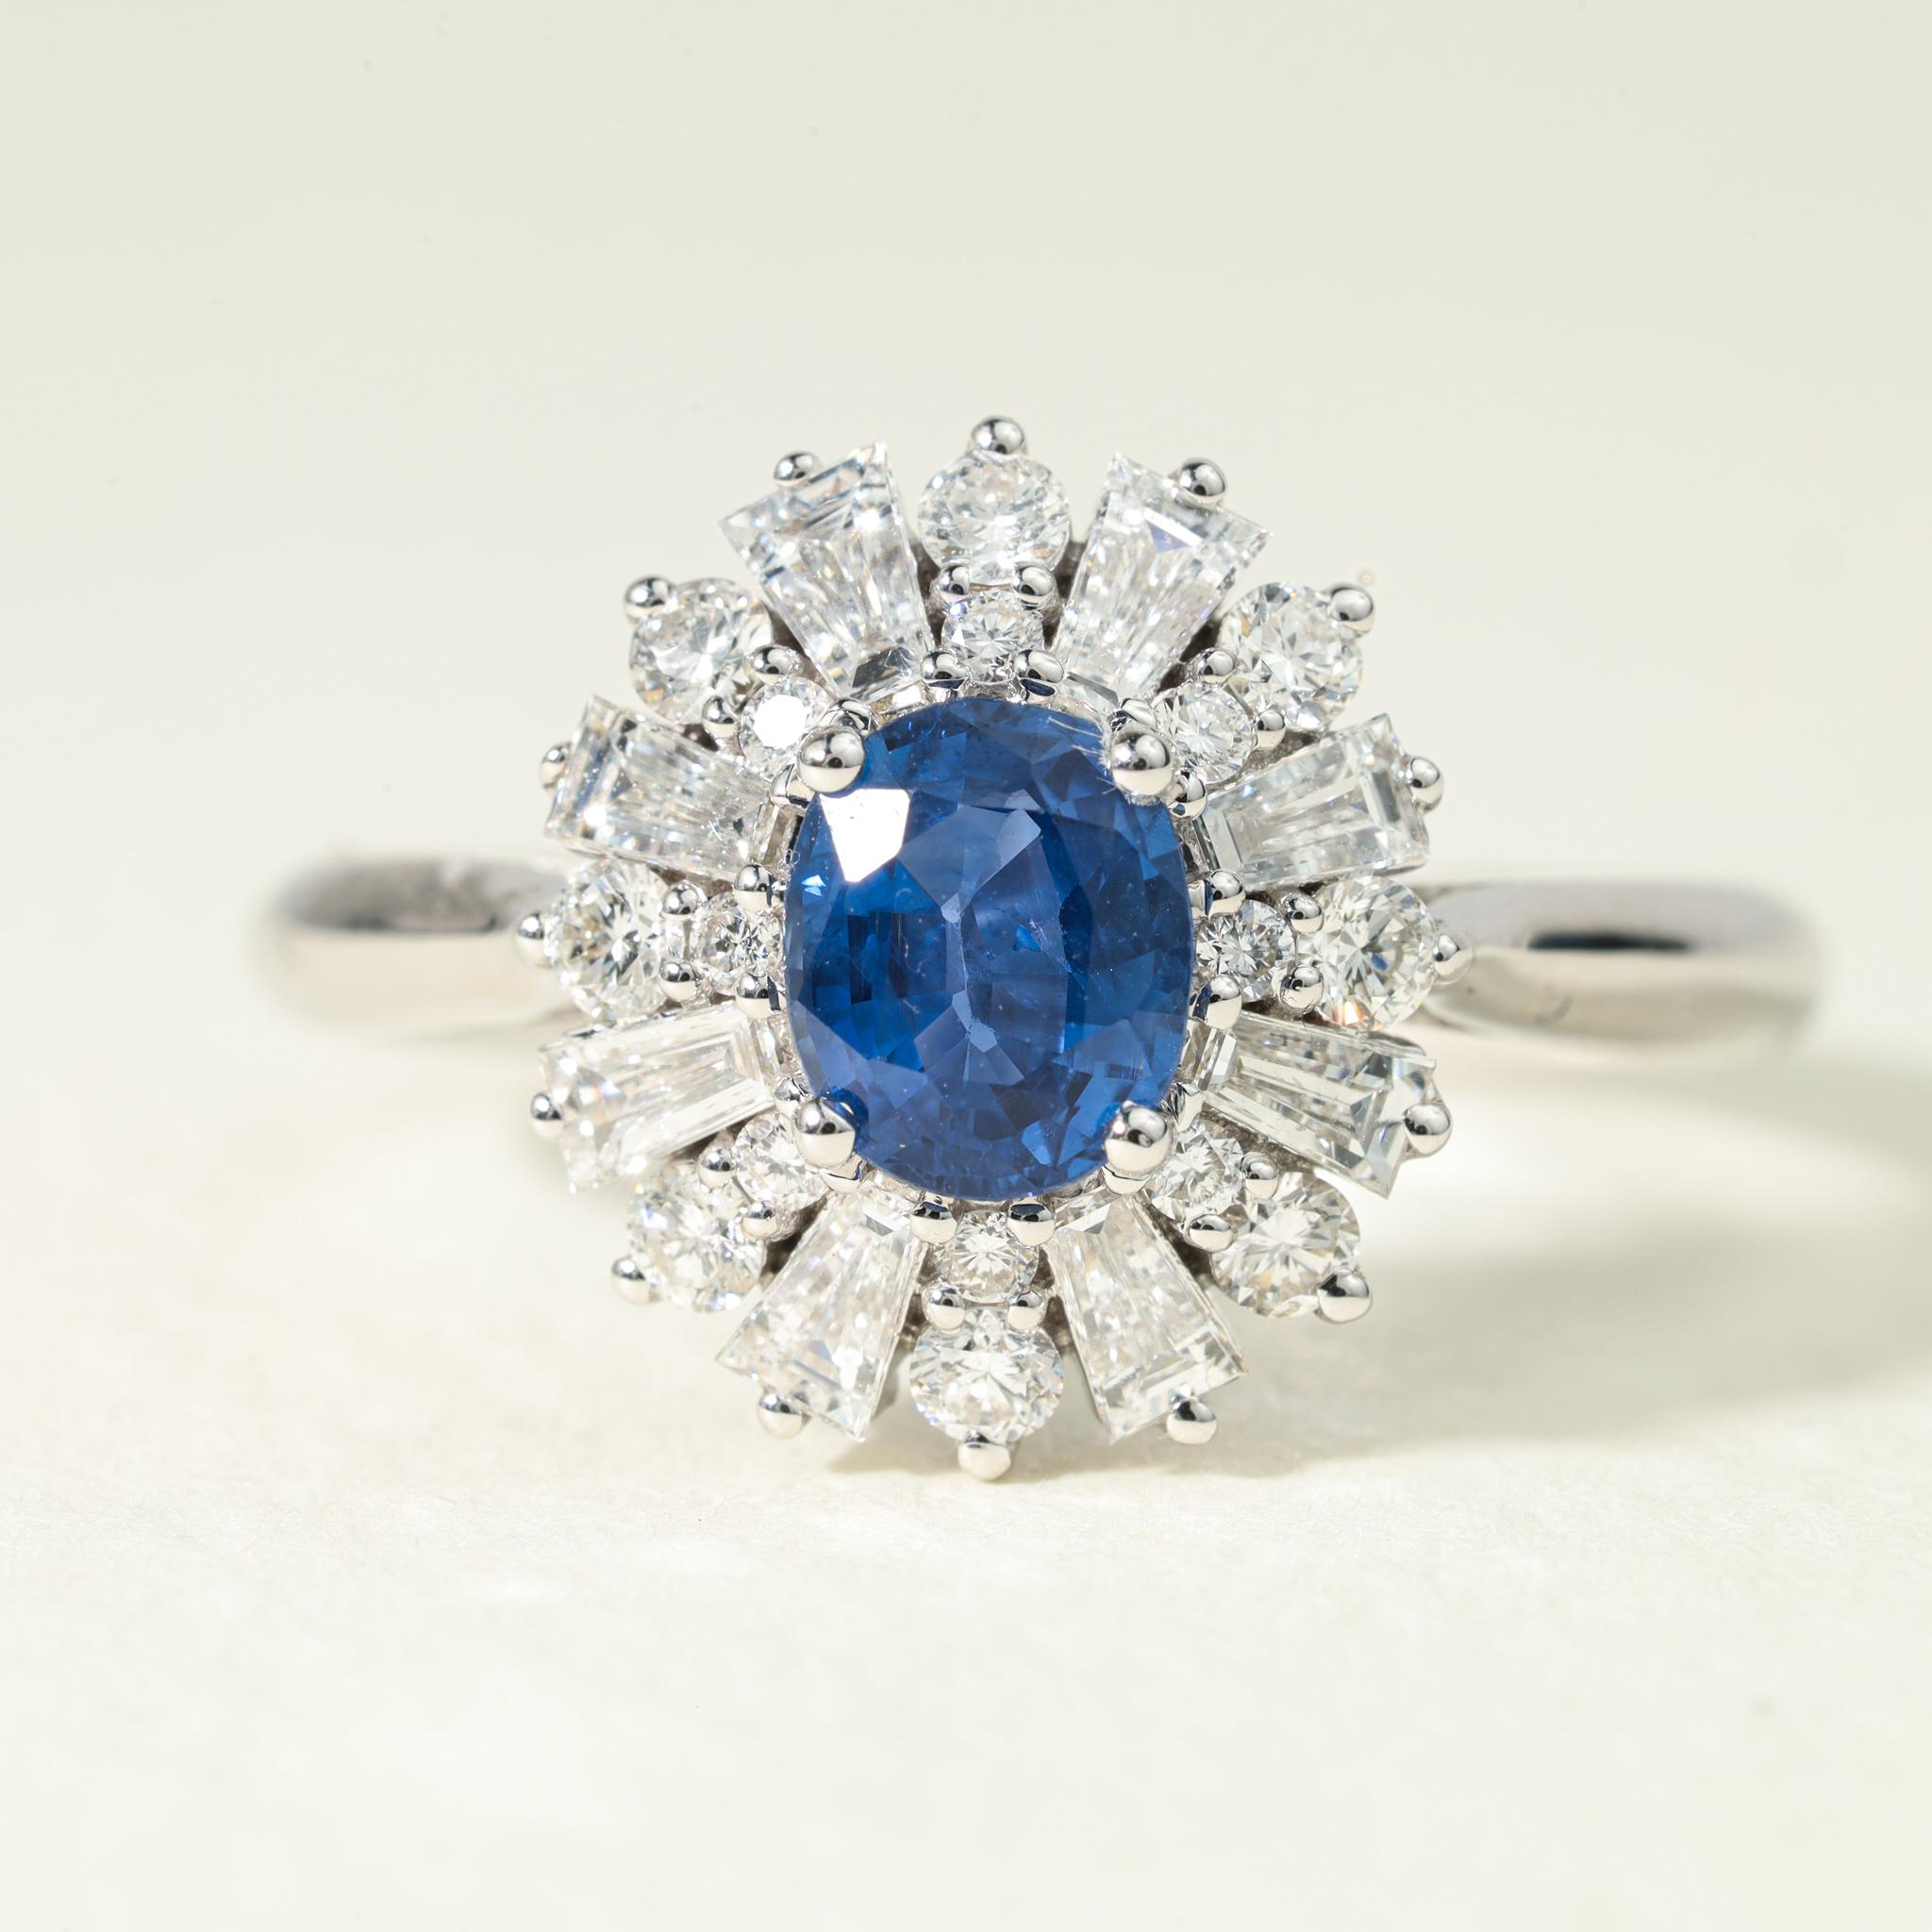 Oval Blue Sapphire Baguette Diamond Halo Cocktail Engagement Ring in 18k White Gold

Available in 18k white gold.

Same design can be made also with other custom gemstones per request.

Product details:

- Solid gold

- Diamond - approx. 0.68